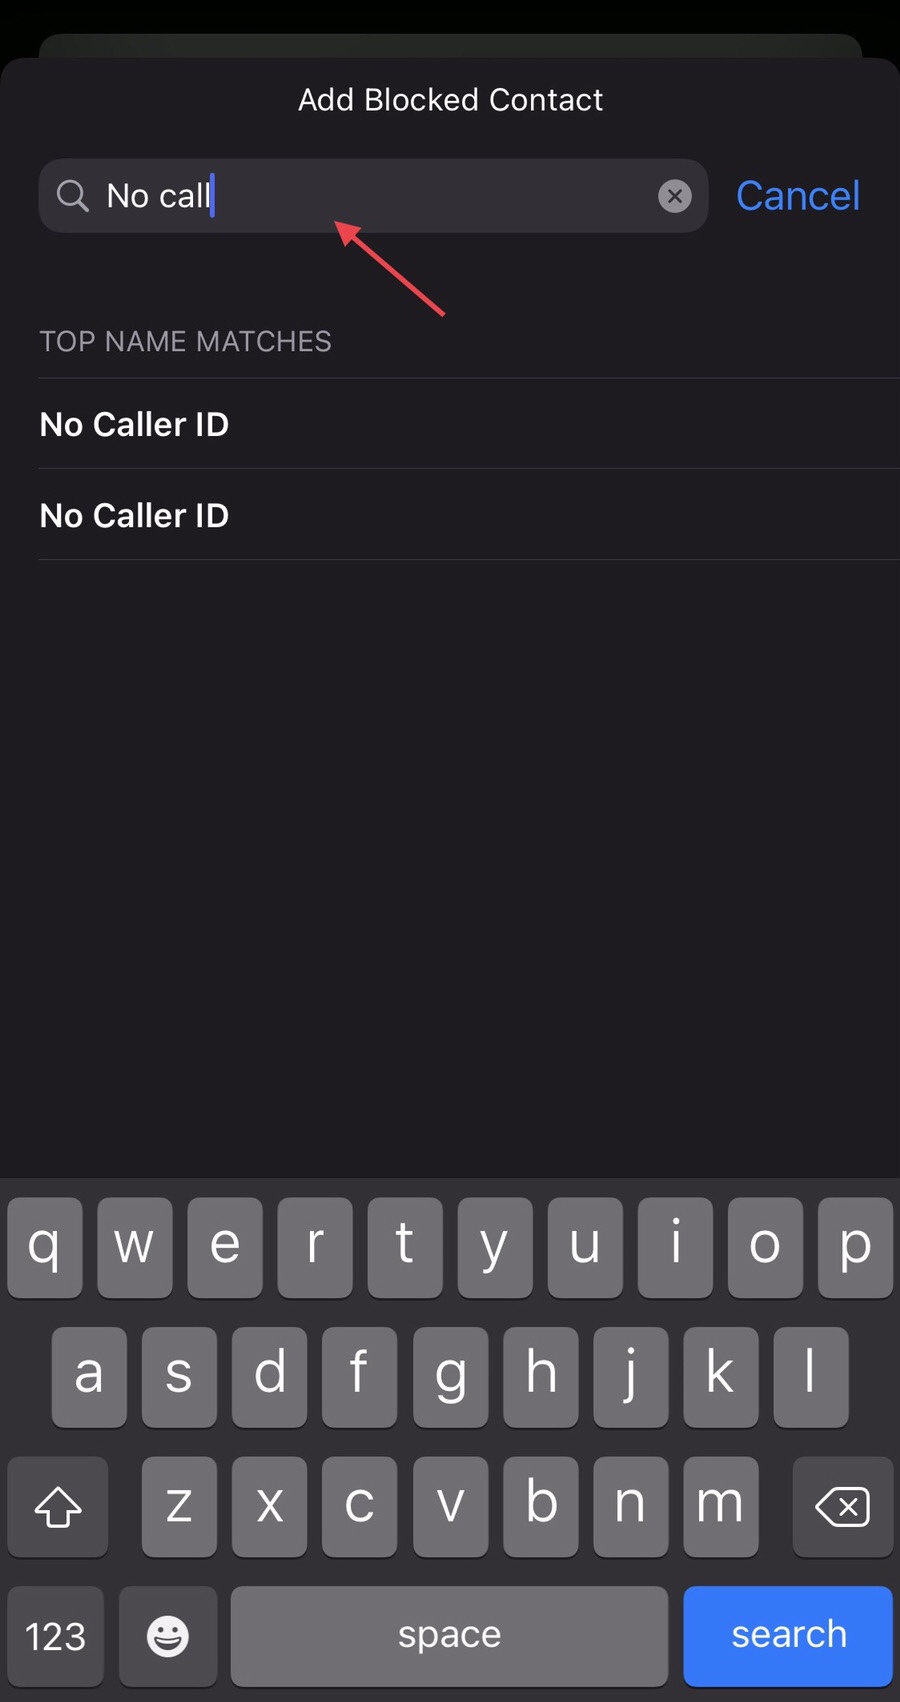 Search for the “No caller ID” contact in the search box and select it.